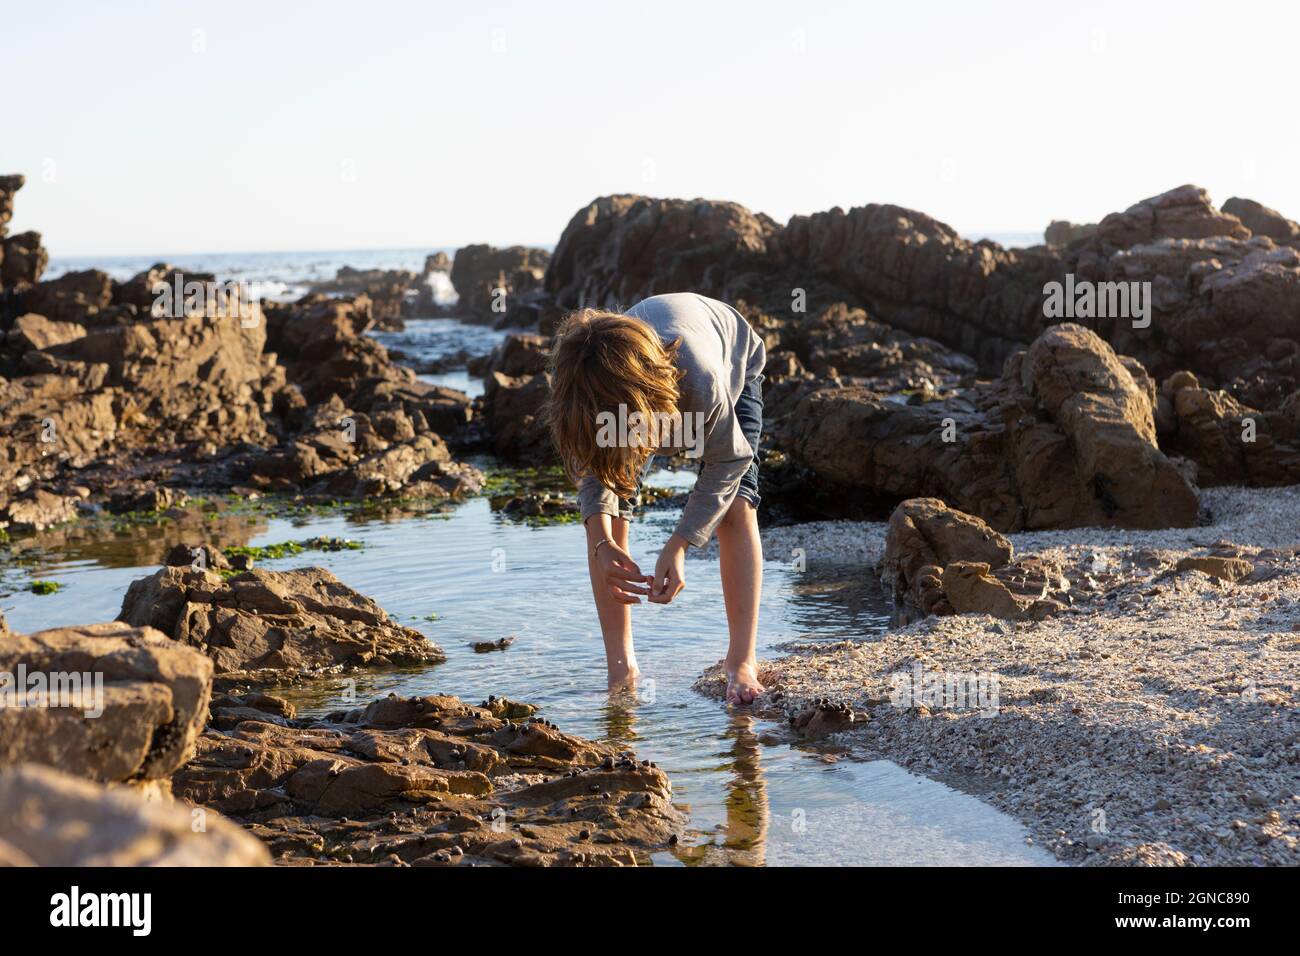 Young boy exploring a rock pool among the jagged rocks of the Atlantic Ocean coastline at sunset, De Kelders, Western Cape, South Africa. Stock Photo